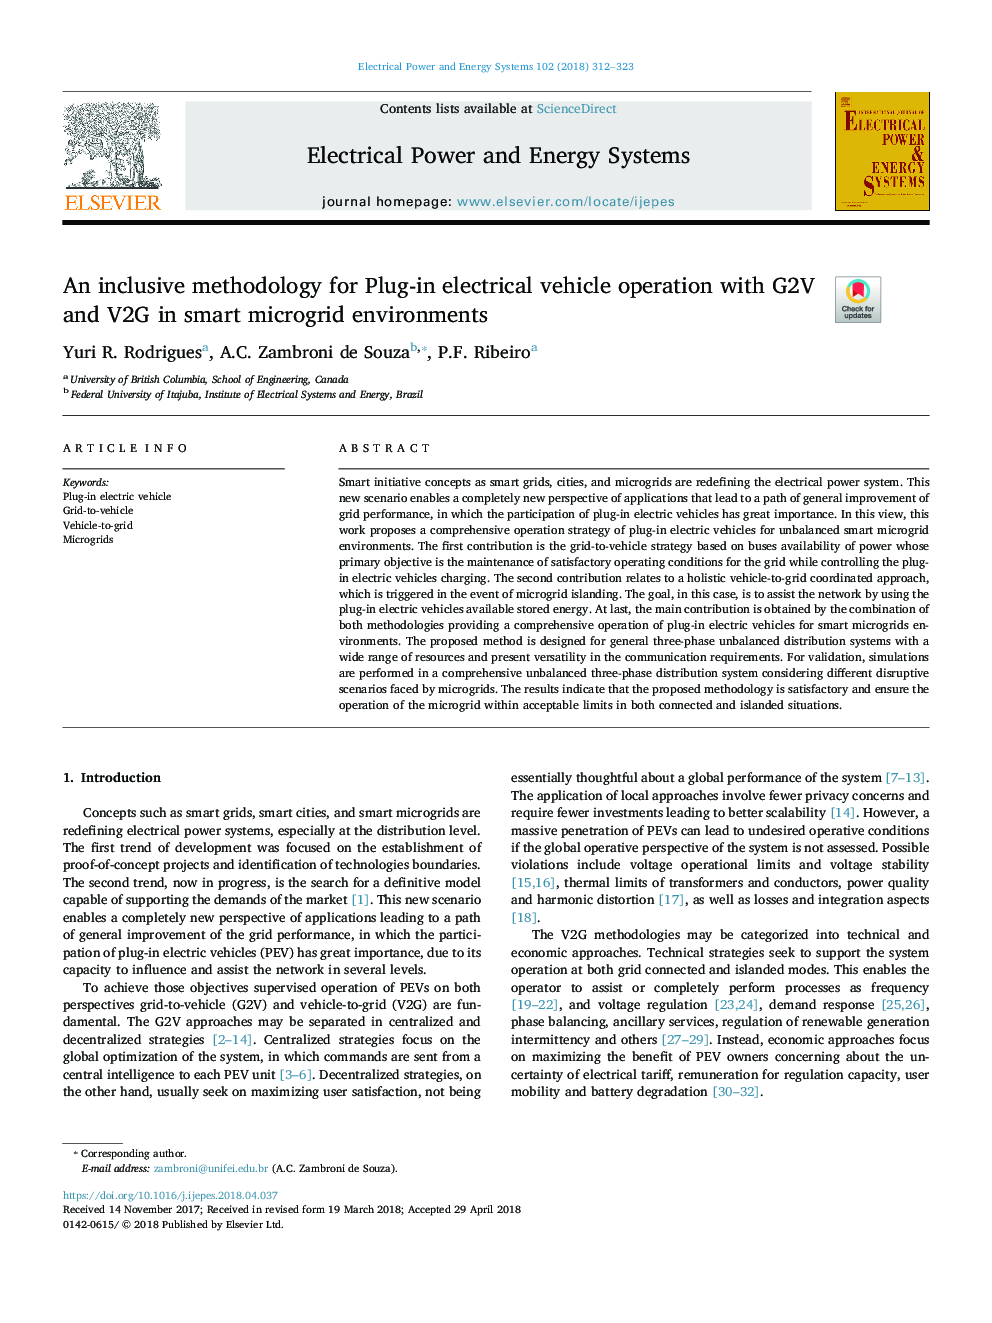 An inclusive methodology for Plug-in electrical vehicle operation with G2V and V2G in smart microgrid environments